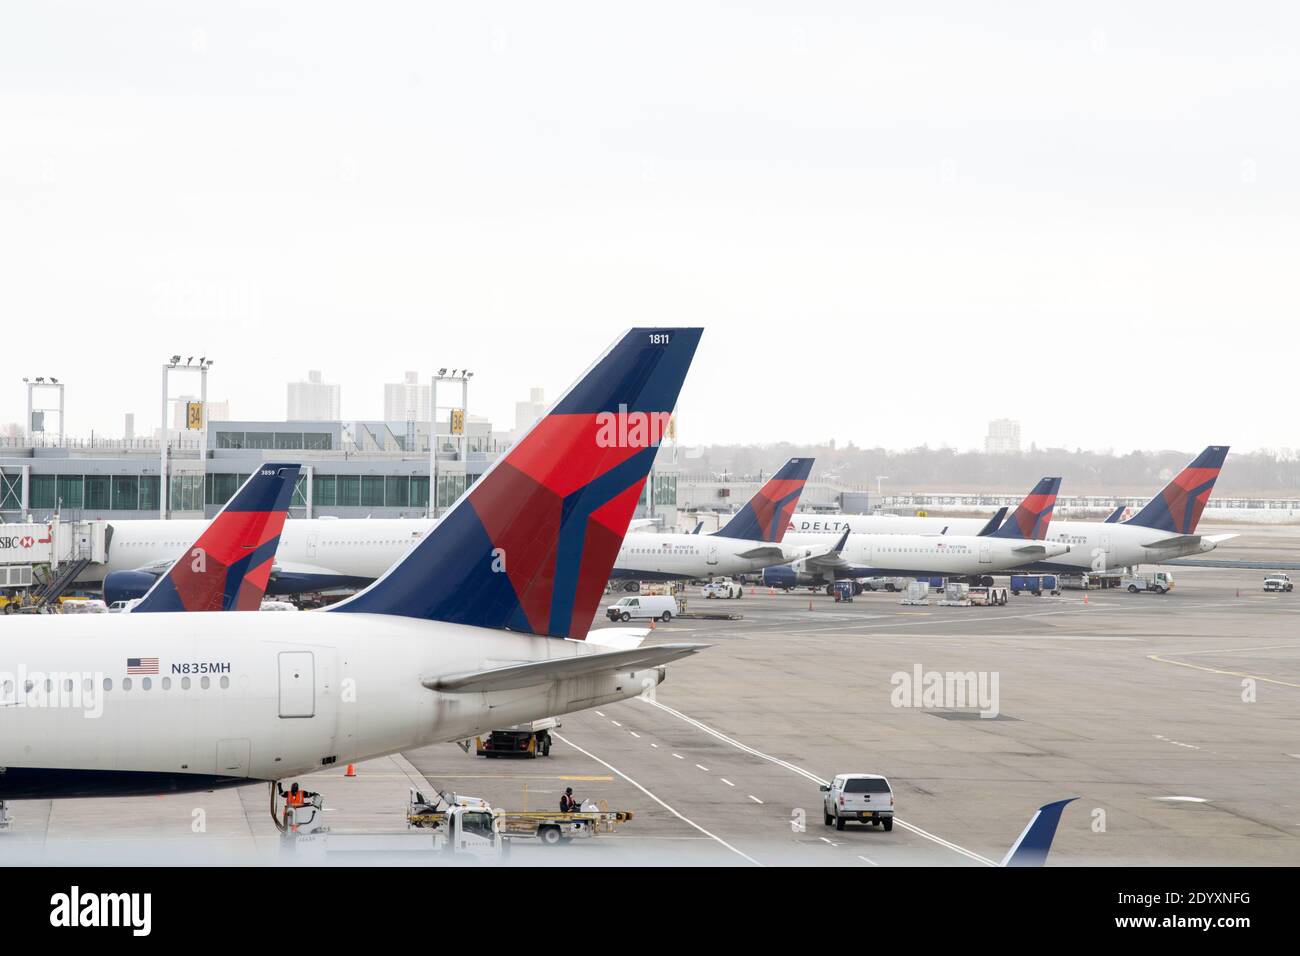 NEW YORK, NY – DECEMBER 24: A Delta Airlines airplanes are seen at gates at John F. Kennedy International Airport (JFK) on December 24, 2020 in New Yo Stock Photo